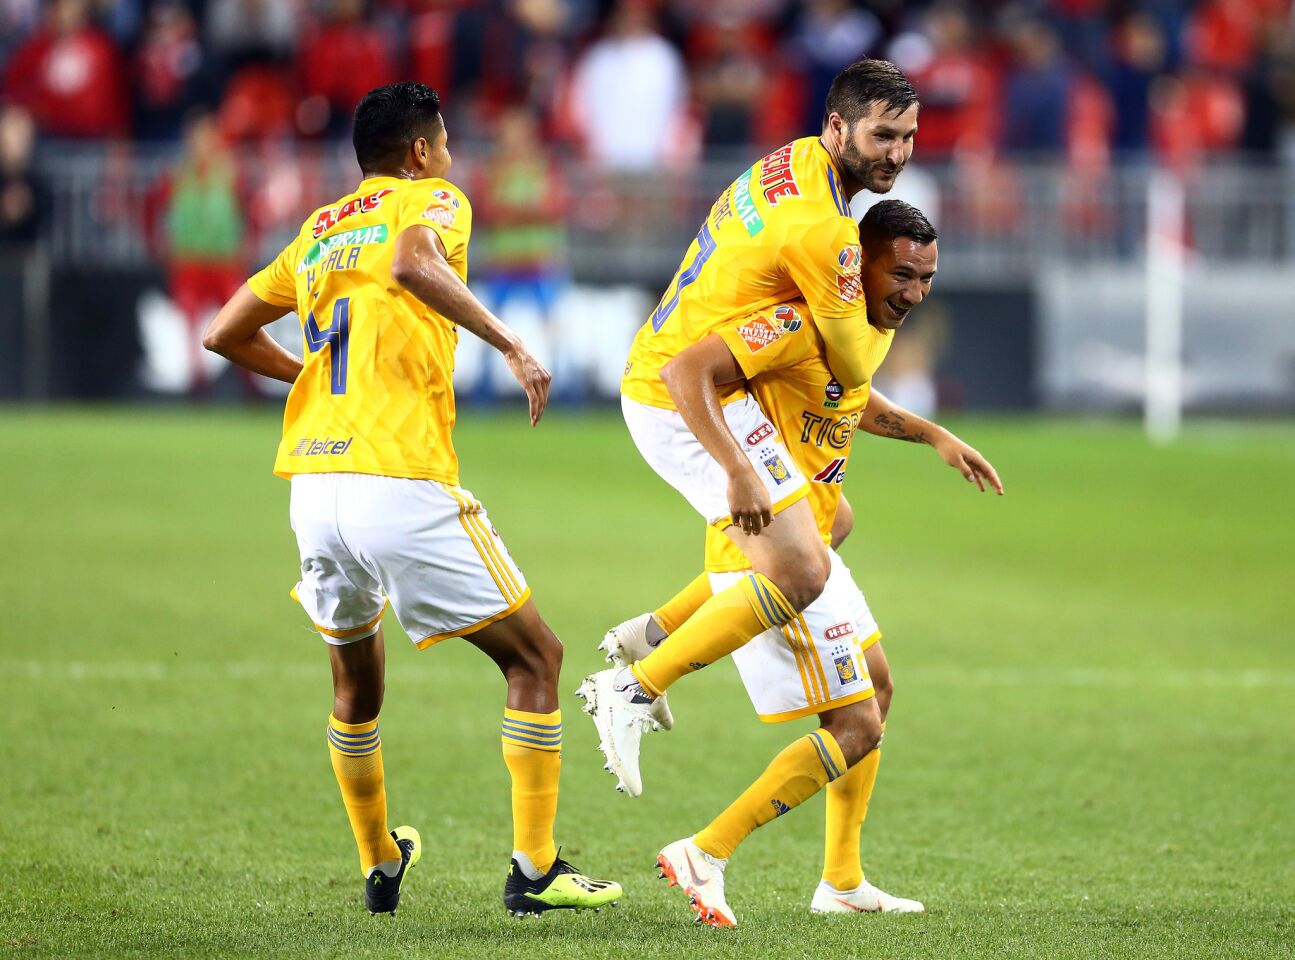 TORONTO, ON - SEPTEMBER 19: Jesús Dueñas #29 of Tigres UANL celebrates a goal with André-Pierre Gignac #10 during the second half of the 2018 Campeones Cup Final against Toronto FC at BMO Field on September 19, 2018 in Toronto, Canada. (Photo by Vaughn Ridley/Getty Images) ** OUTS - ELSENT, FPG, CM - OUTS * NM, PH, VA if sourced by CT, LA or MoD **